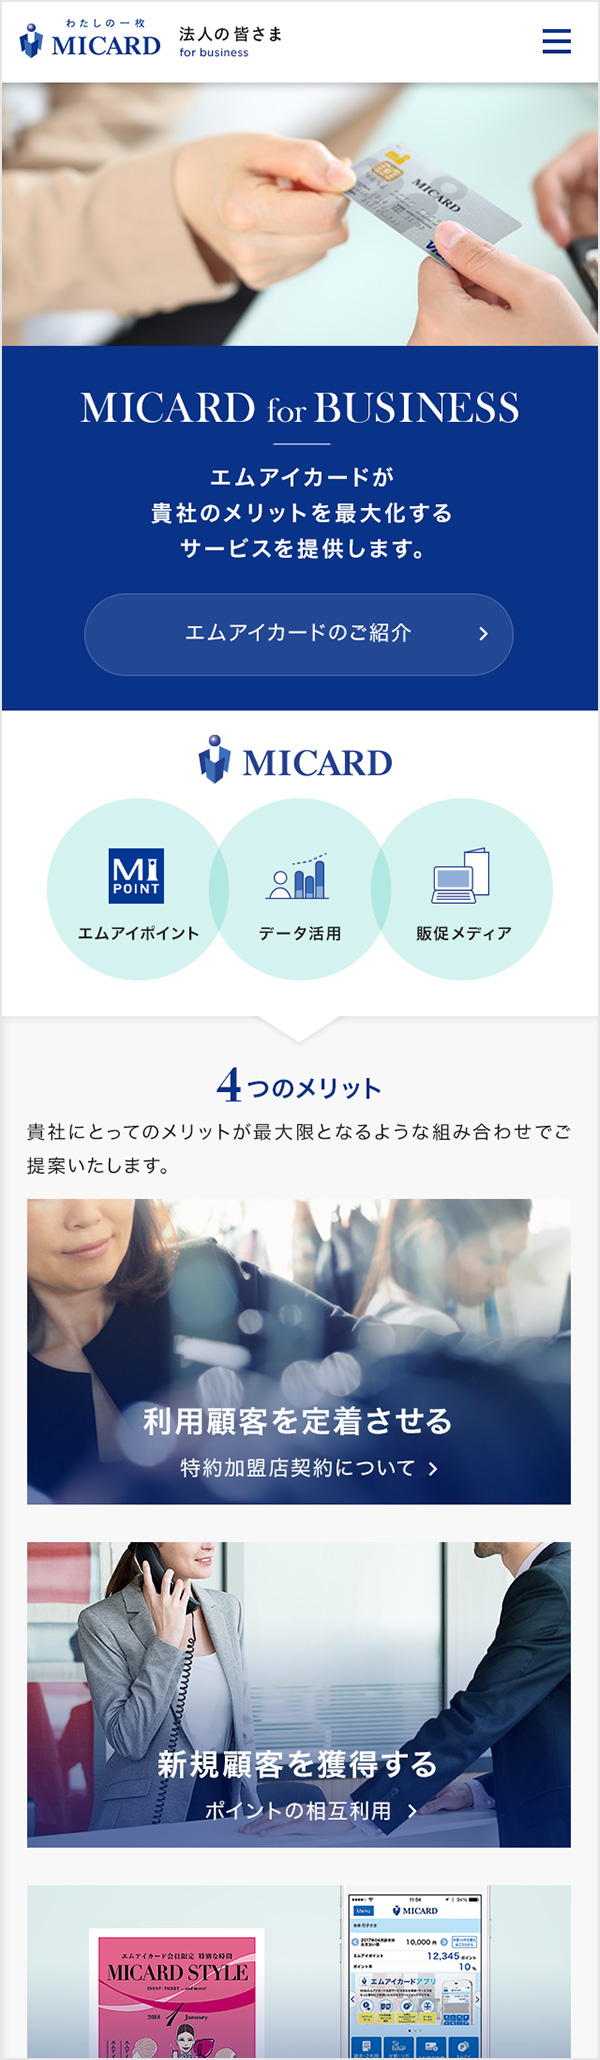 MICARD - for Business